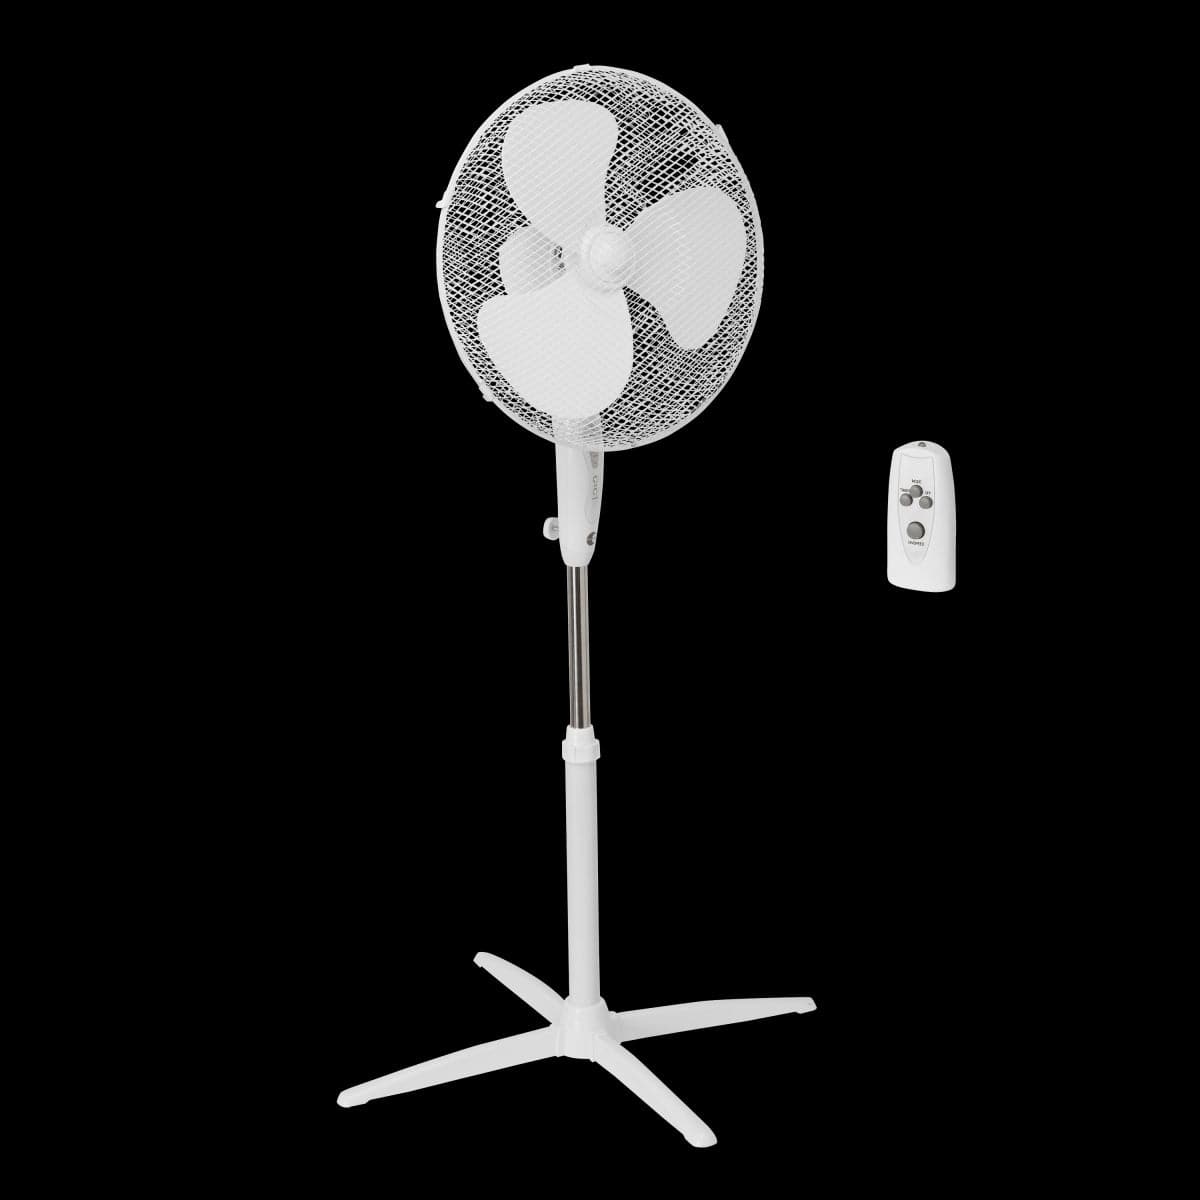 FLOOR STANDING FAN 40CM 45W WHITE WITH REMOTE CONTROL EQUATION